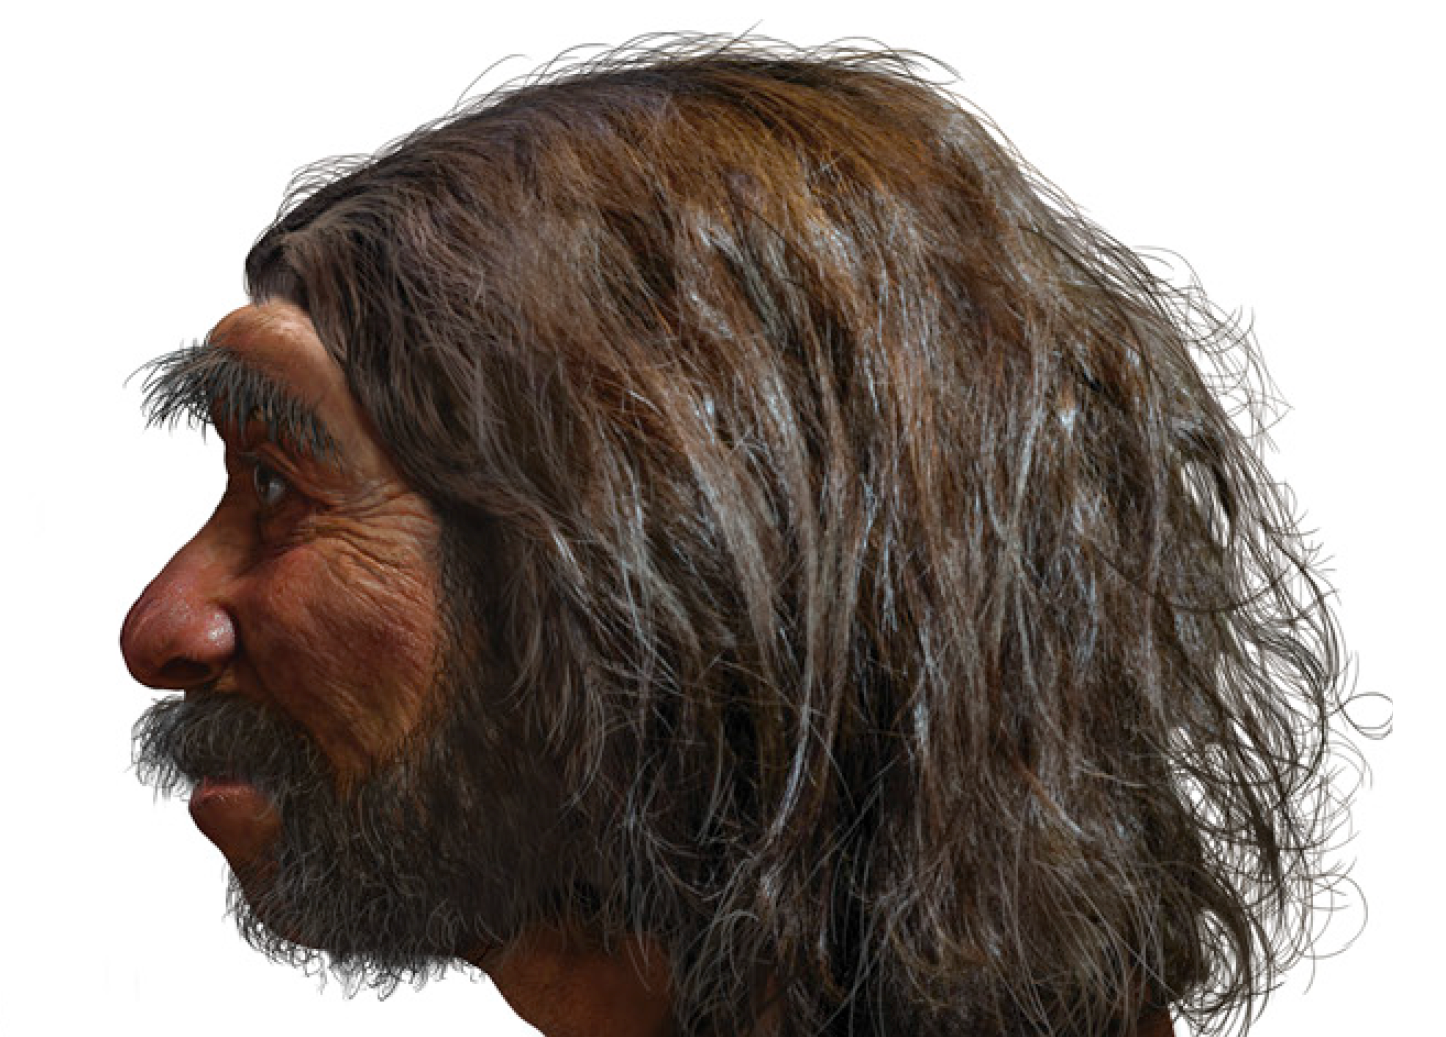 Reconstructed side view of Dragon Man. (Image: Xijun Ni et al., 2021/The Innovation)